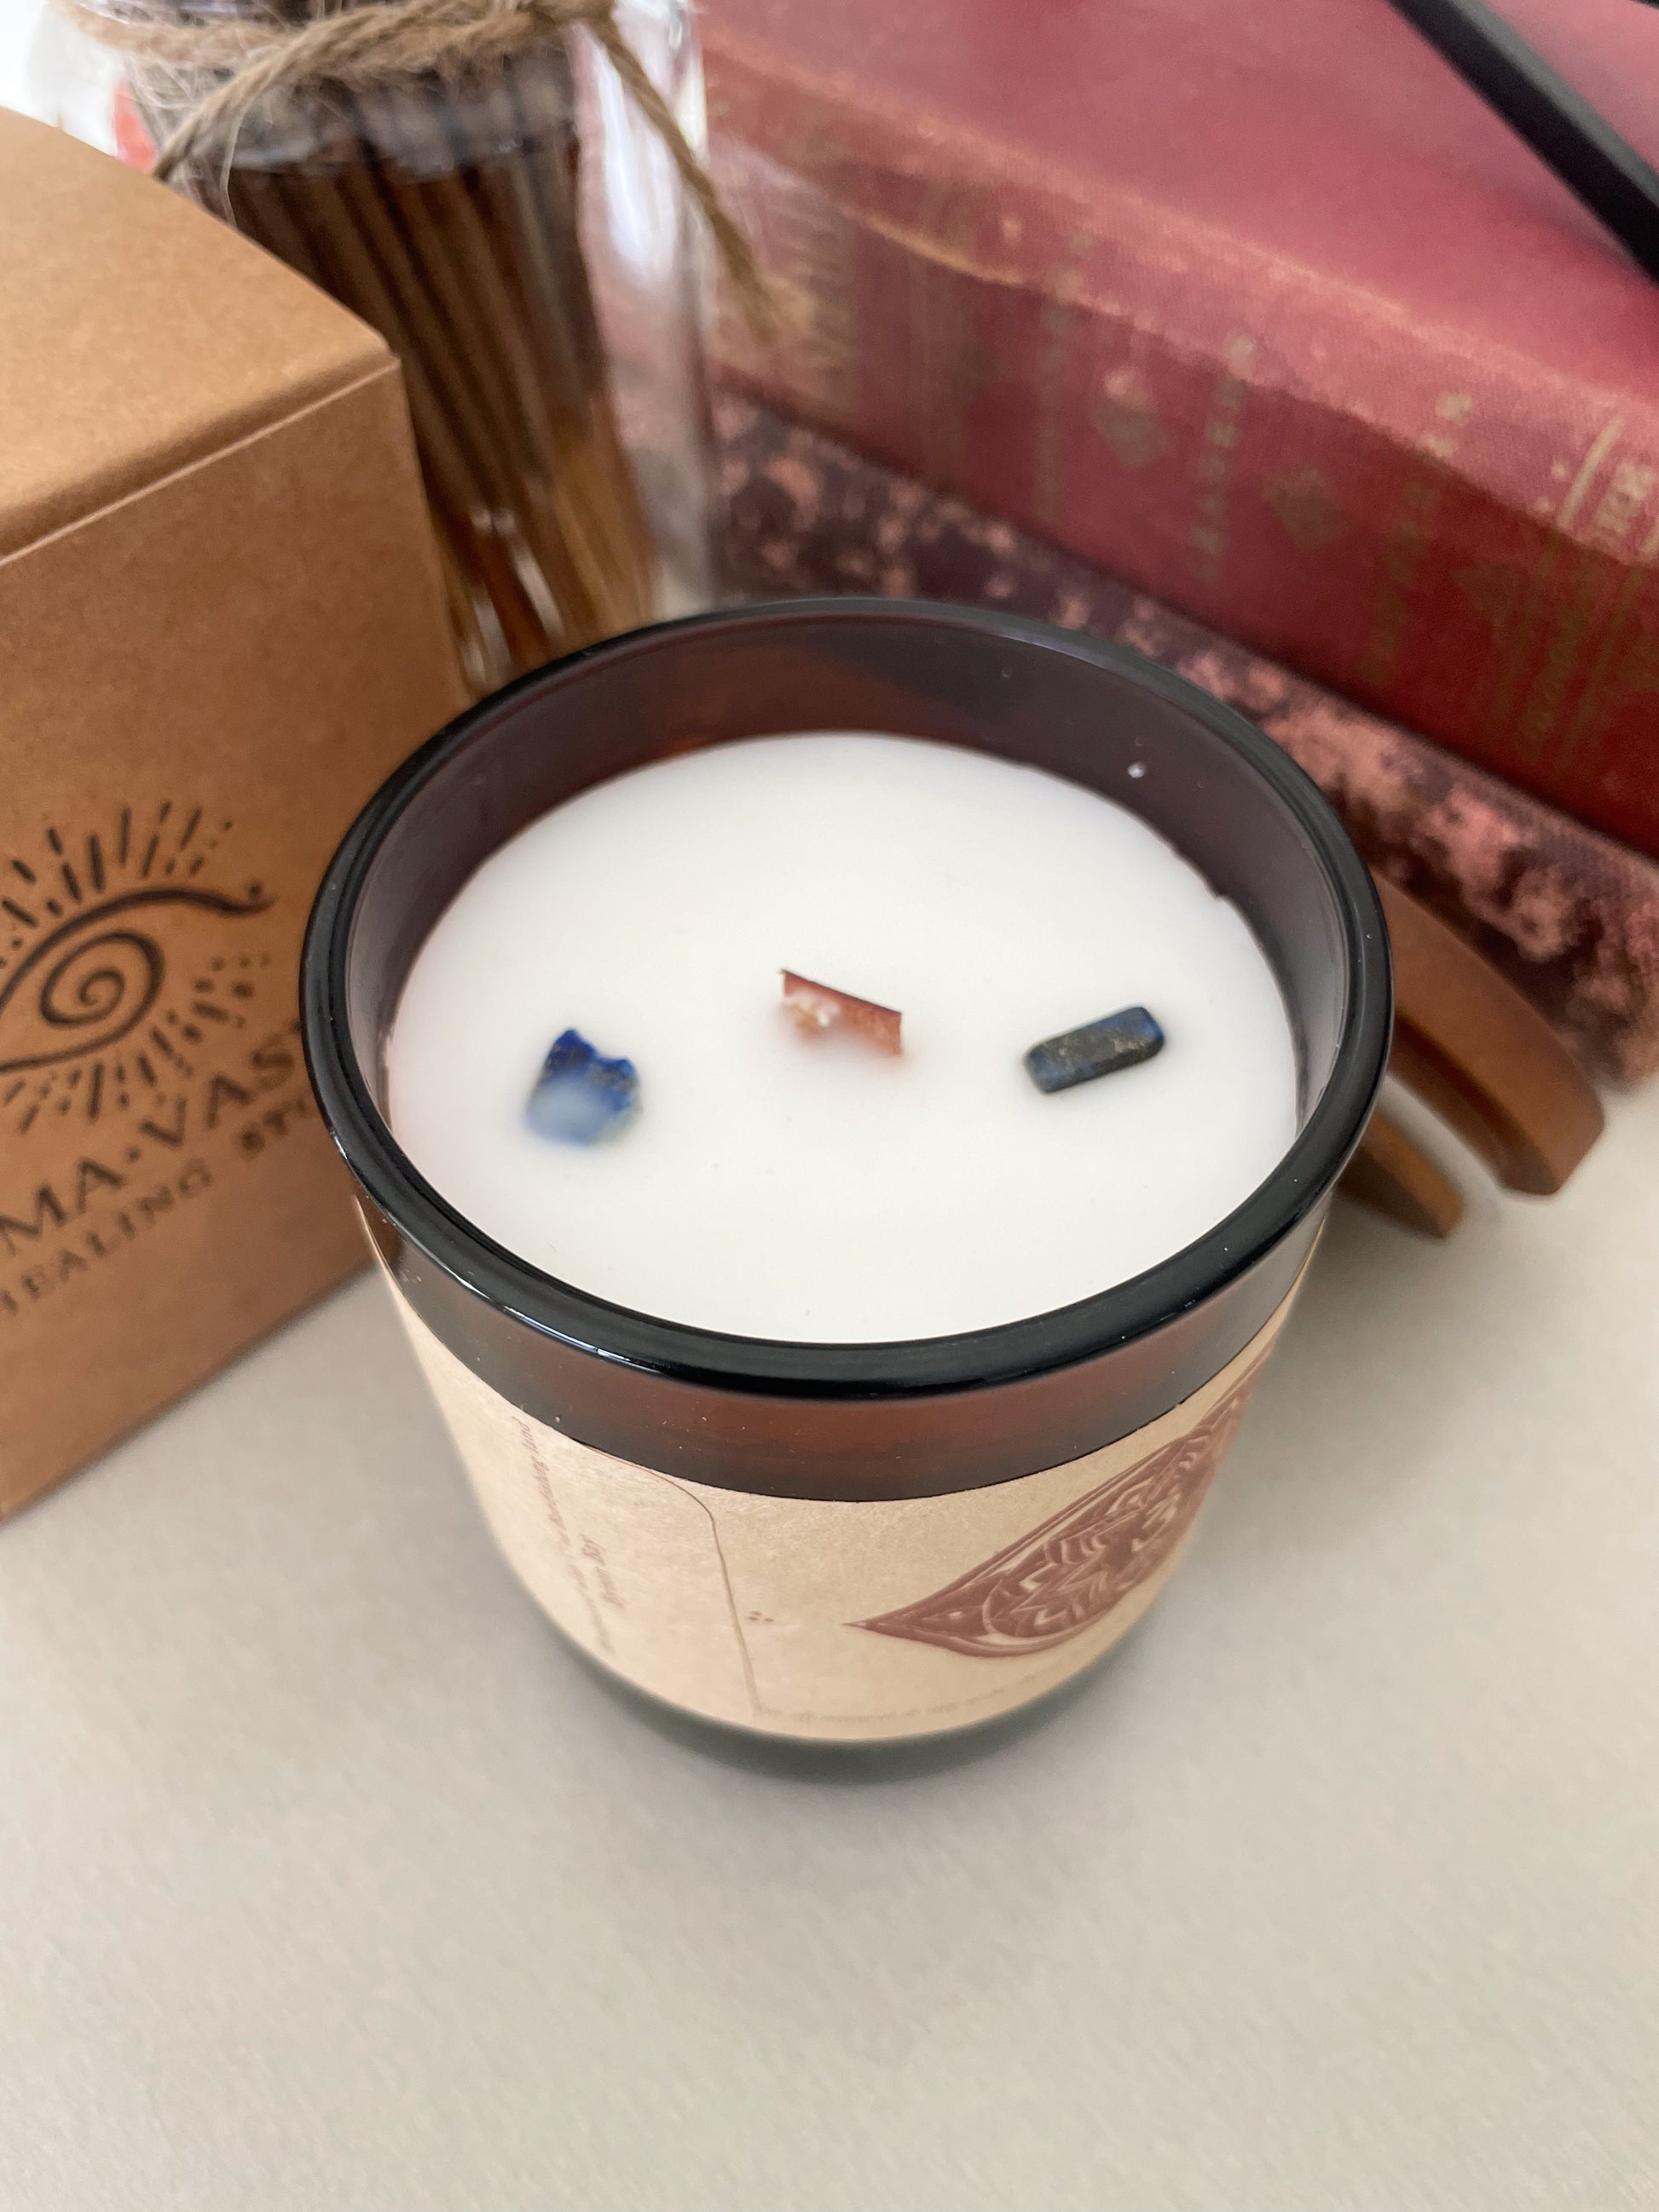 Third Eeye Chakra meditation candle with crystals styled with candle packaging, spiritual books and incense